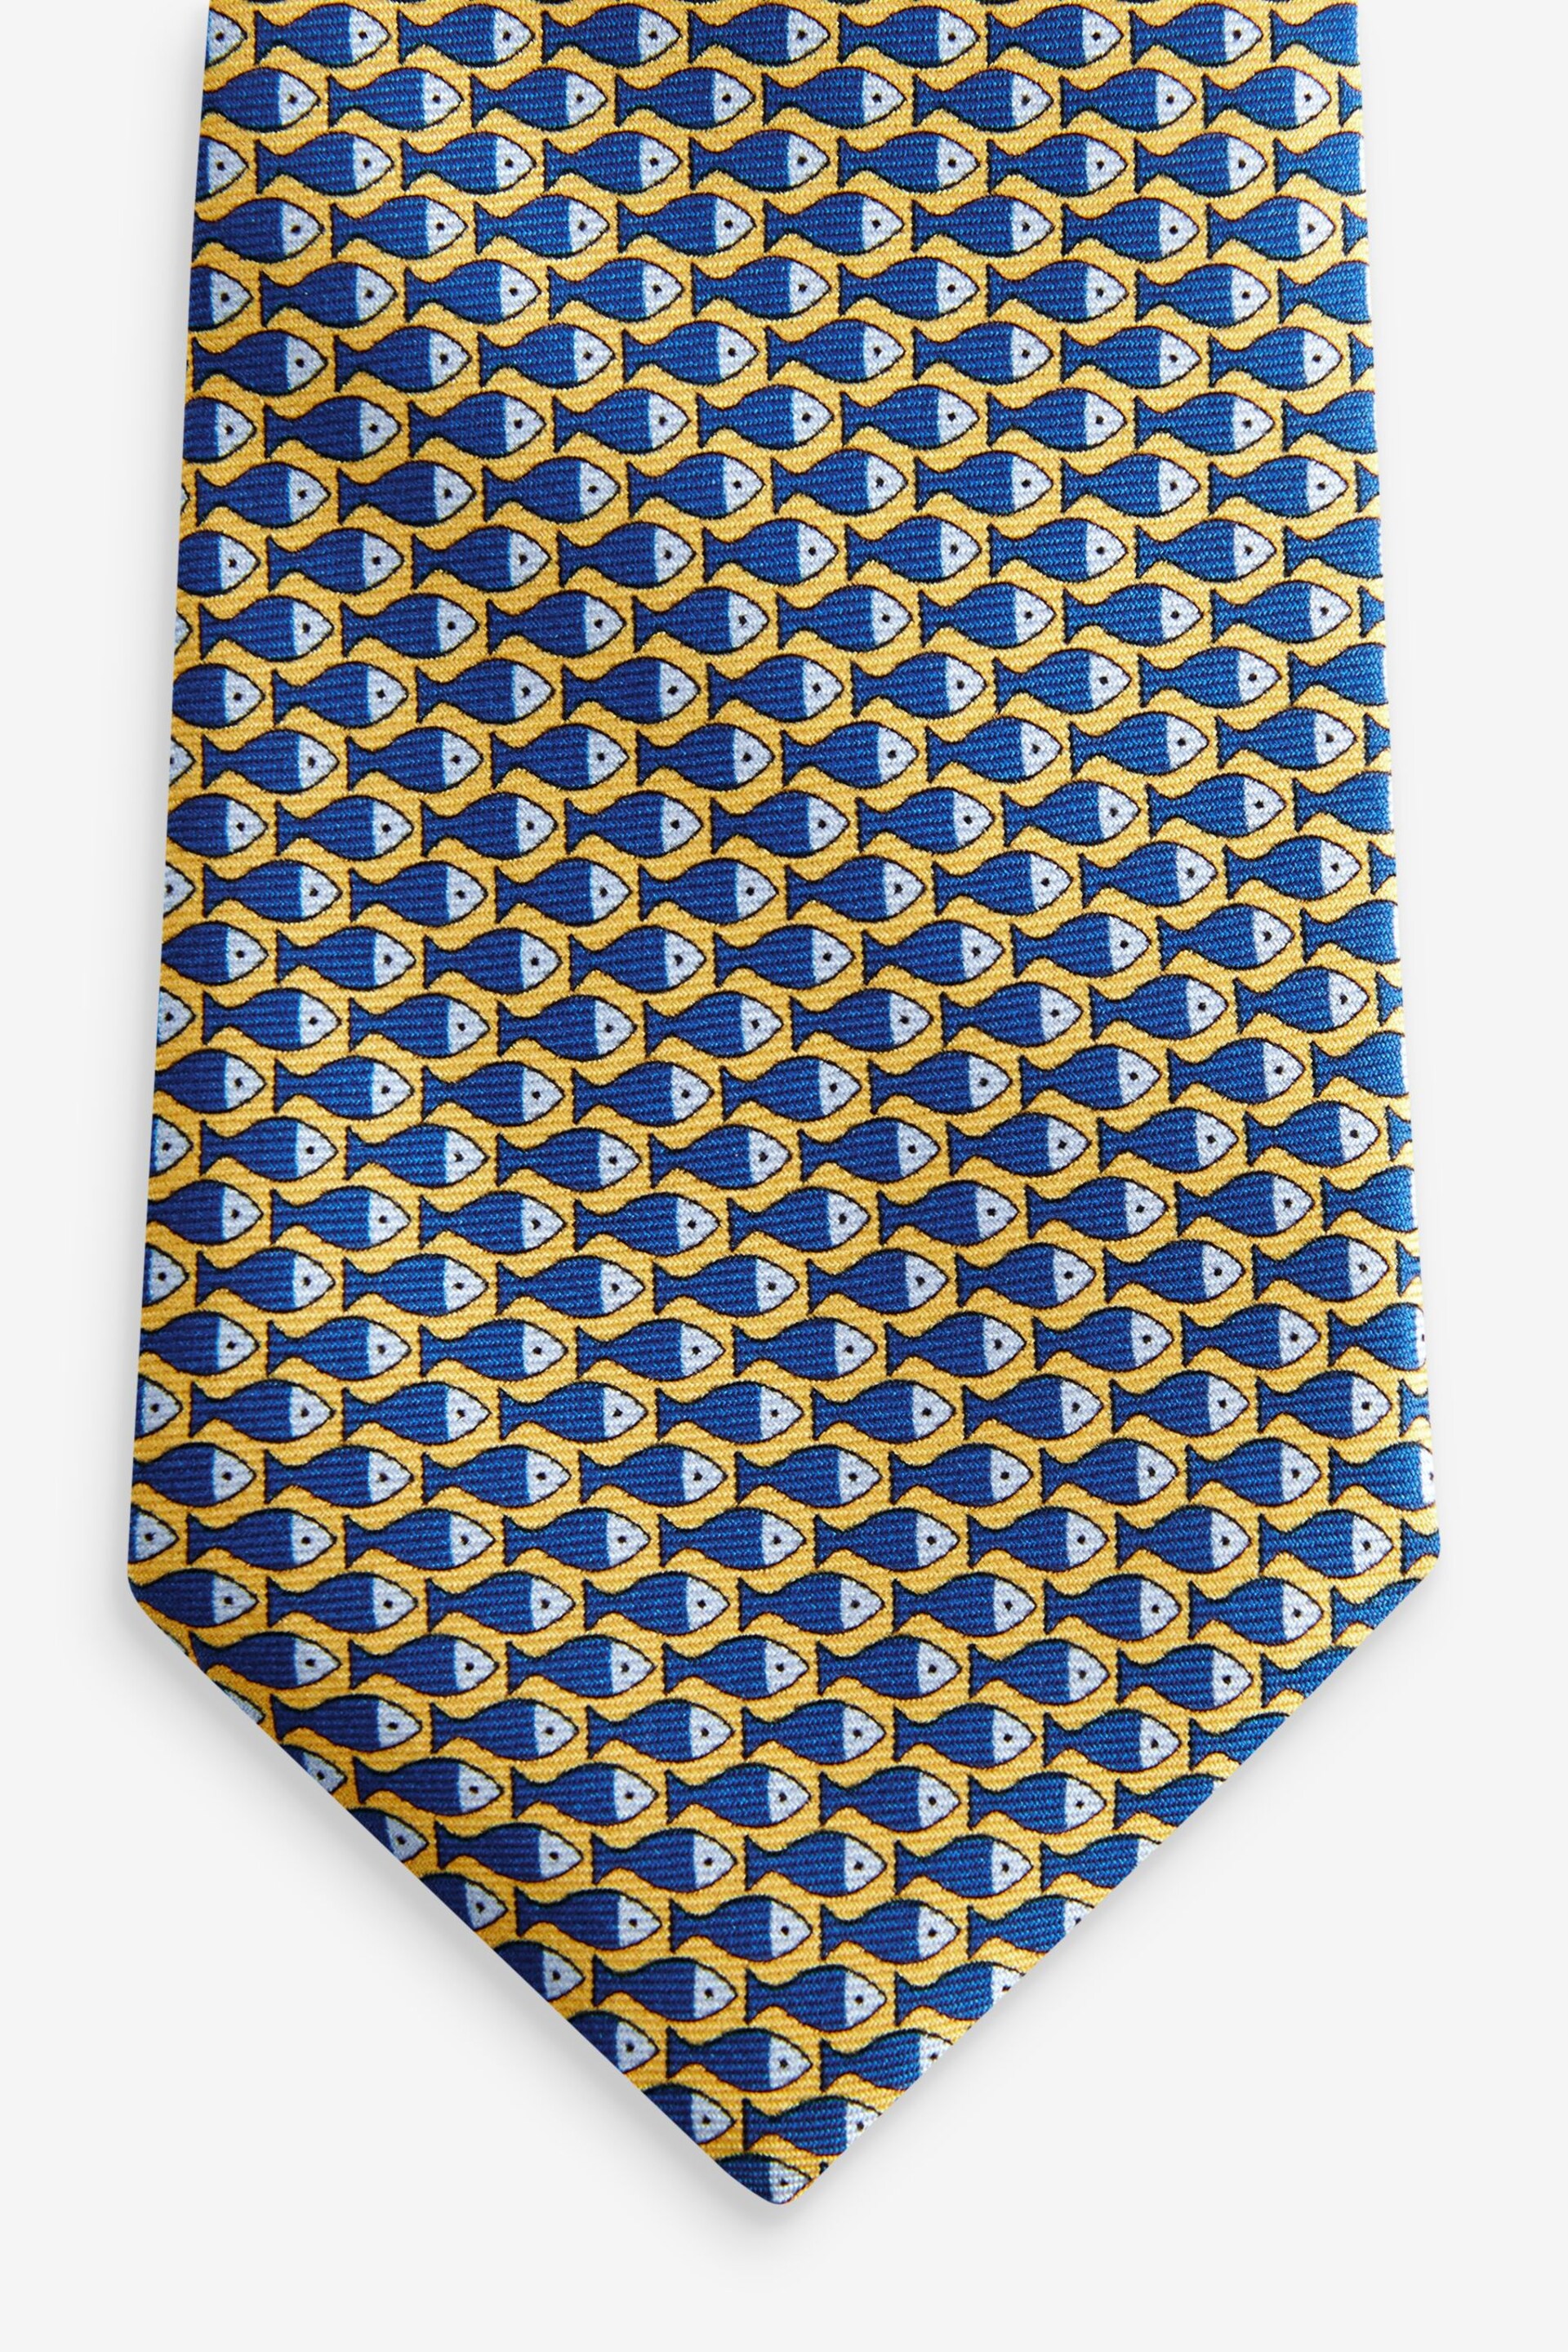 Yellow/Blue Fish Signature Made In Italy Conversational Tie - Image 2 of 4